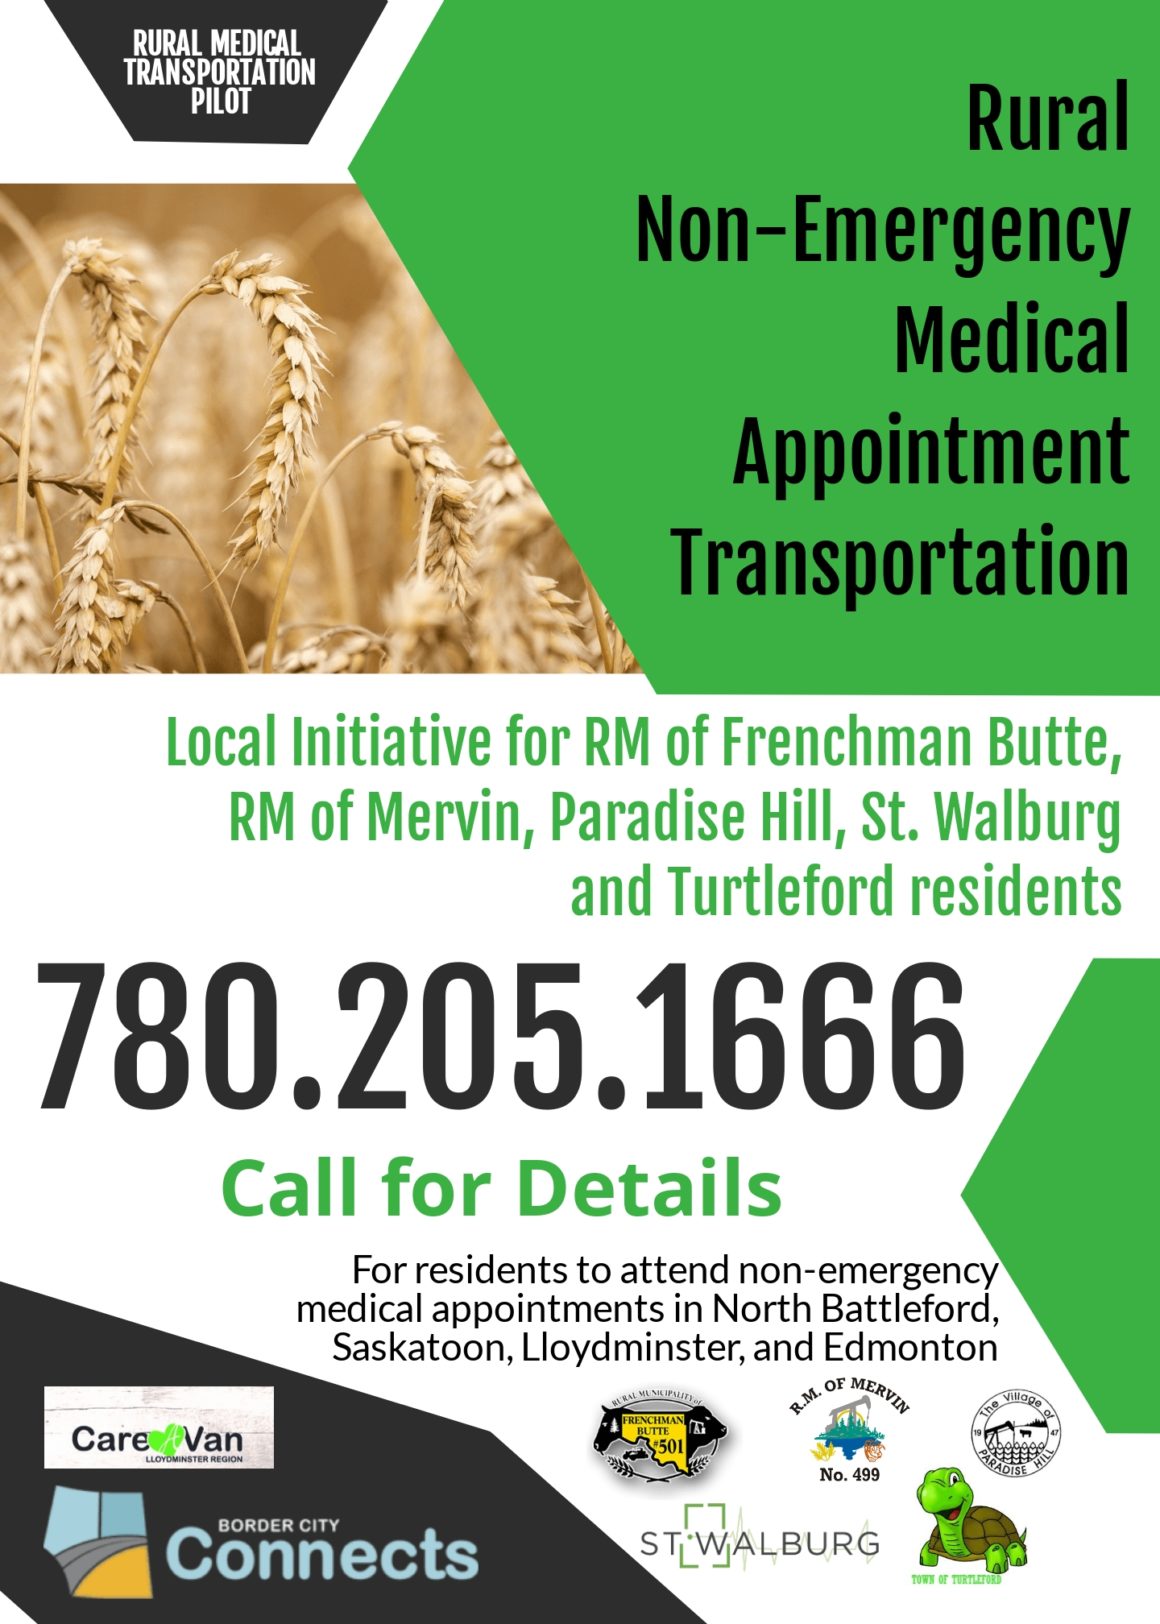 Rural Non-Emergency Medical Appointment Transportation